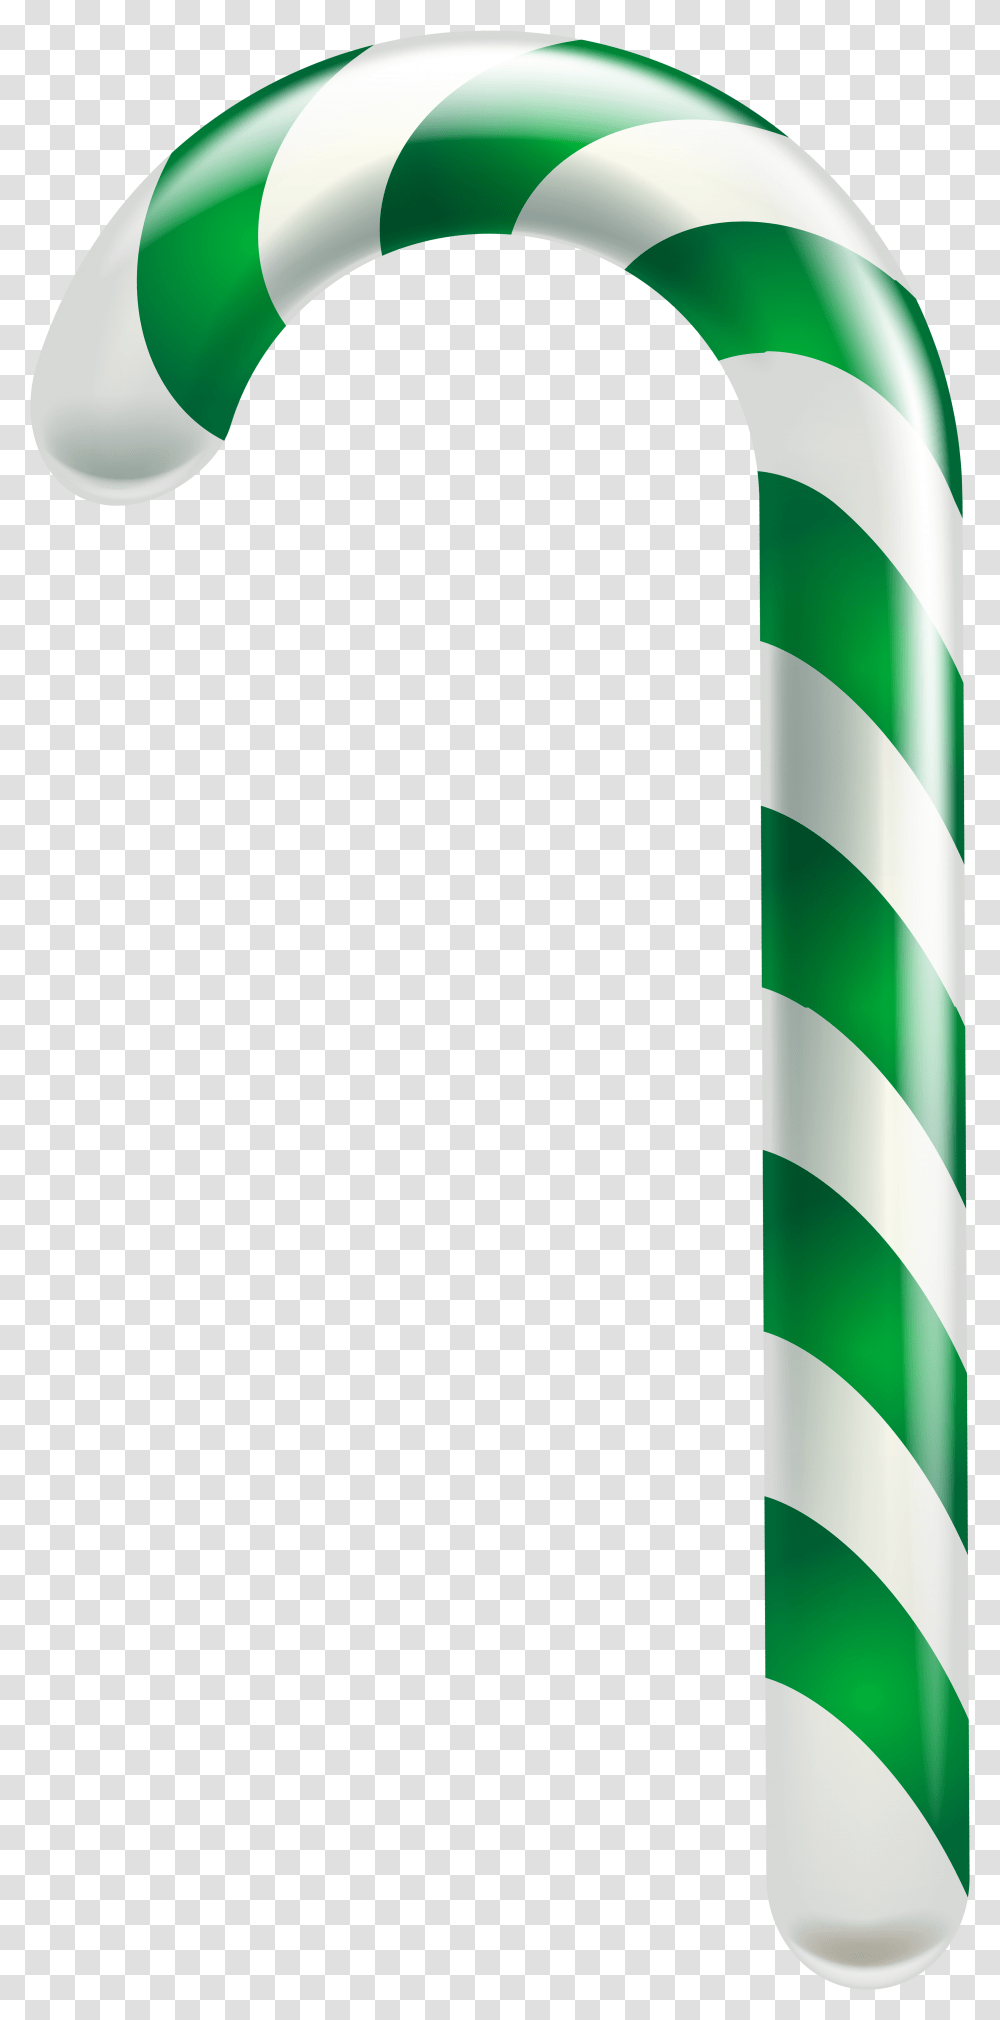 Christmas Candy Cane Green Candy Cane, Stick, Balloon, Food, Lollipop Transparent Png